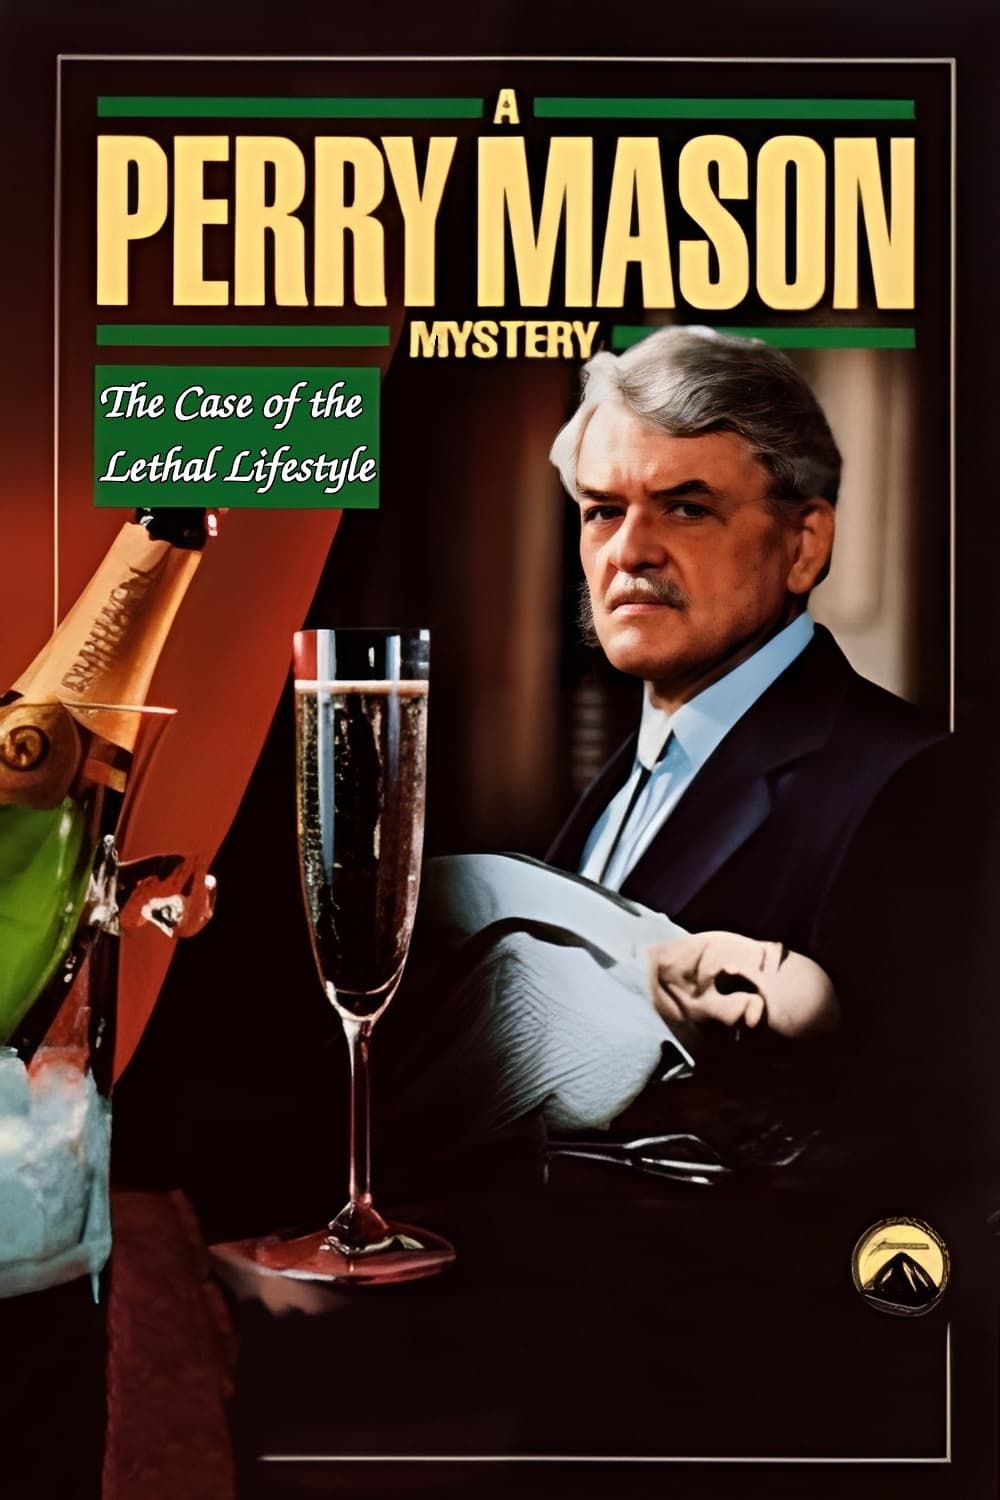 Perry Mason: The Case of the Lethal Lifestyle (1994)